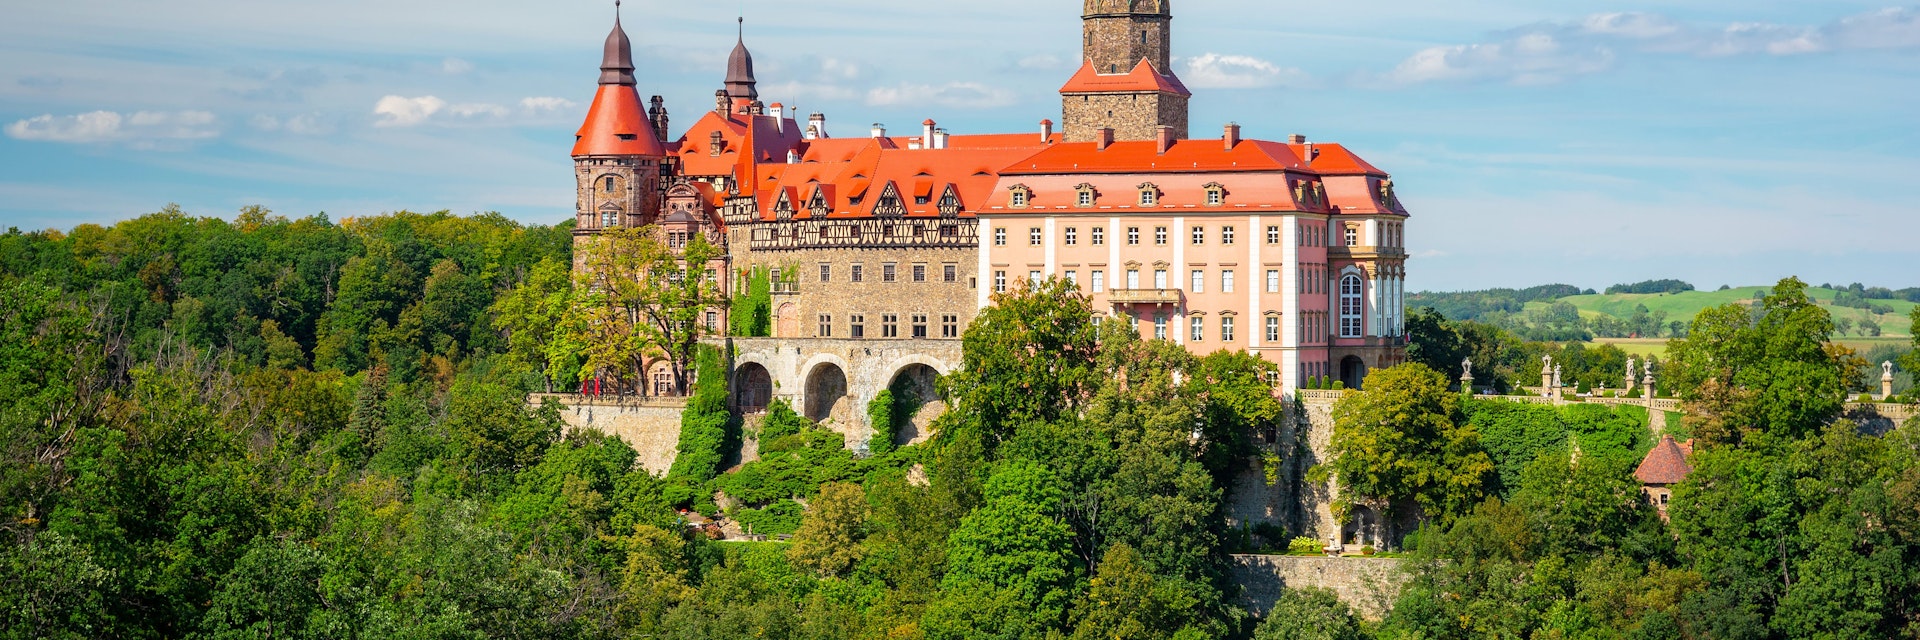 Wałbrzych, Poland - September 8, 2020: Beautiful architecture of the Książ Castle in Lower Silesia, Poland.; Shutterstock ID 1828256156; your: Bridget Brown; gl: 65050; netsuite: Online Editorial; full: POI Image Update